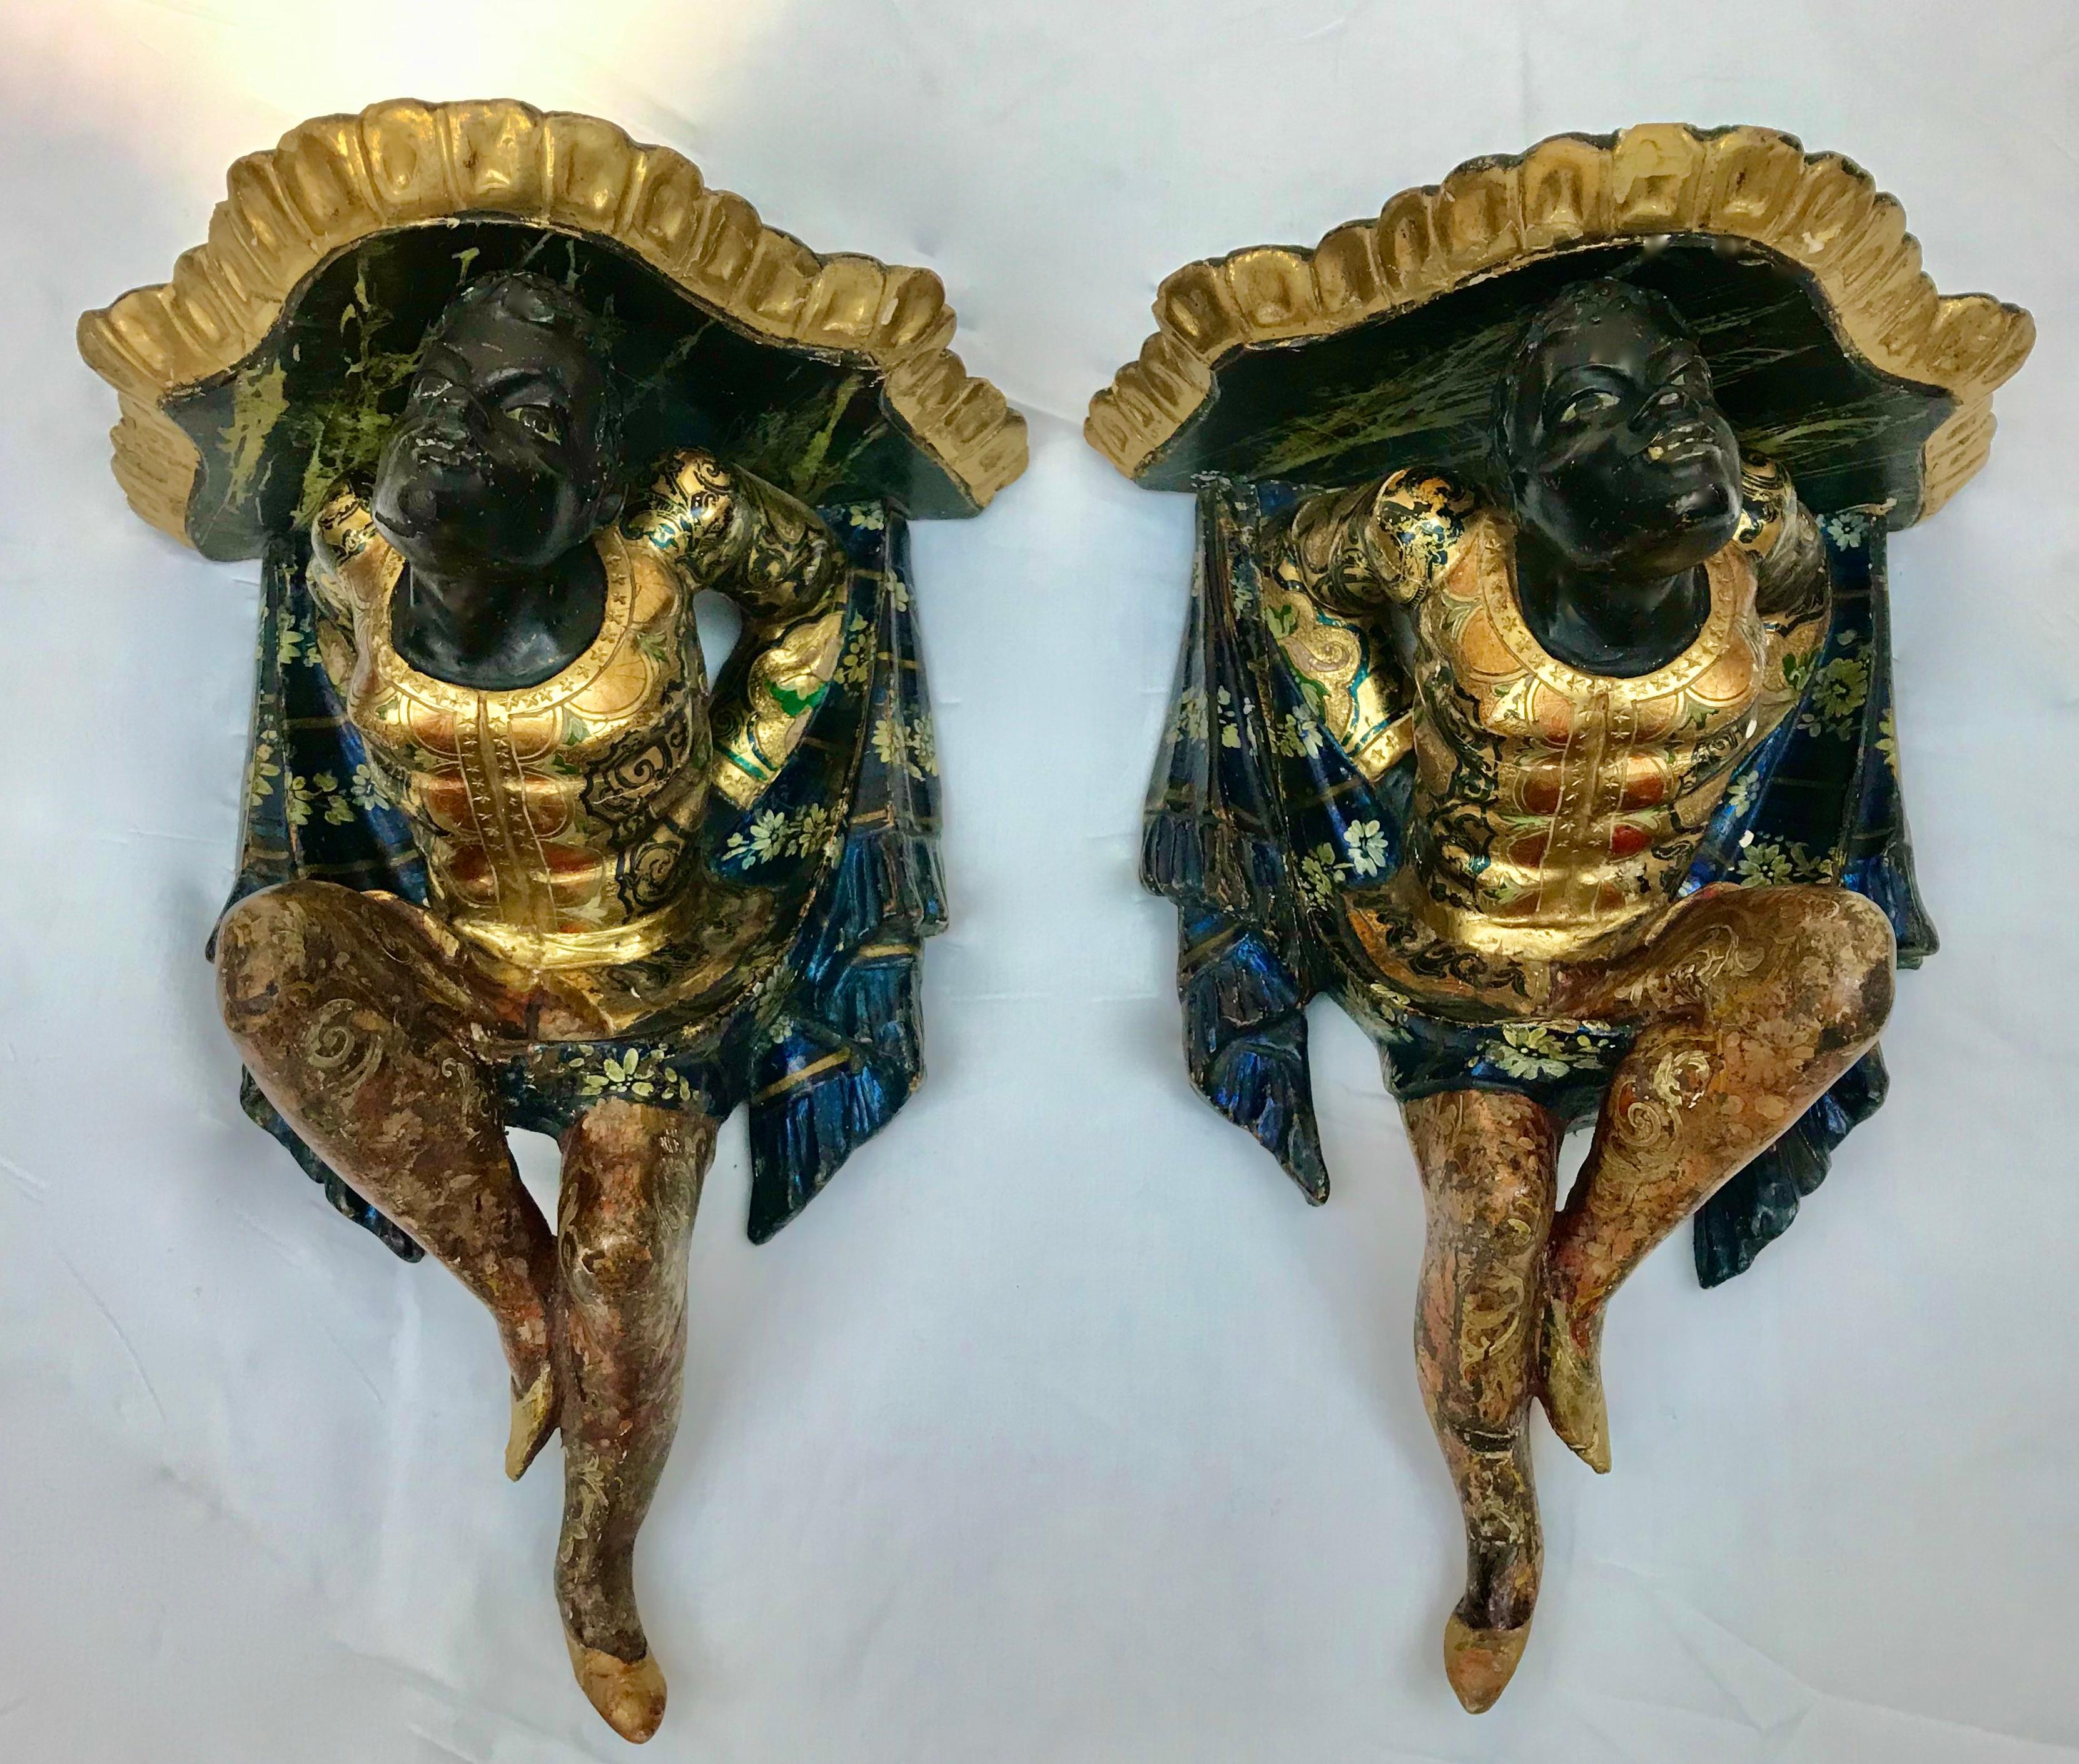 This fanciful  pair of hand carved, gilded, and polychrome figural wall brackets were made in the 19th Century in Venice, Italy.
They feature fancy dressed figures supporting faux marble shelves with carved drapery and tassels.